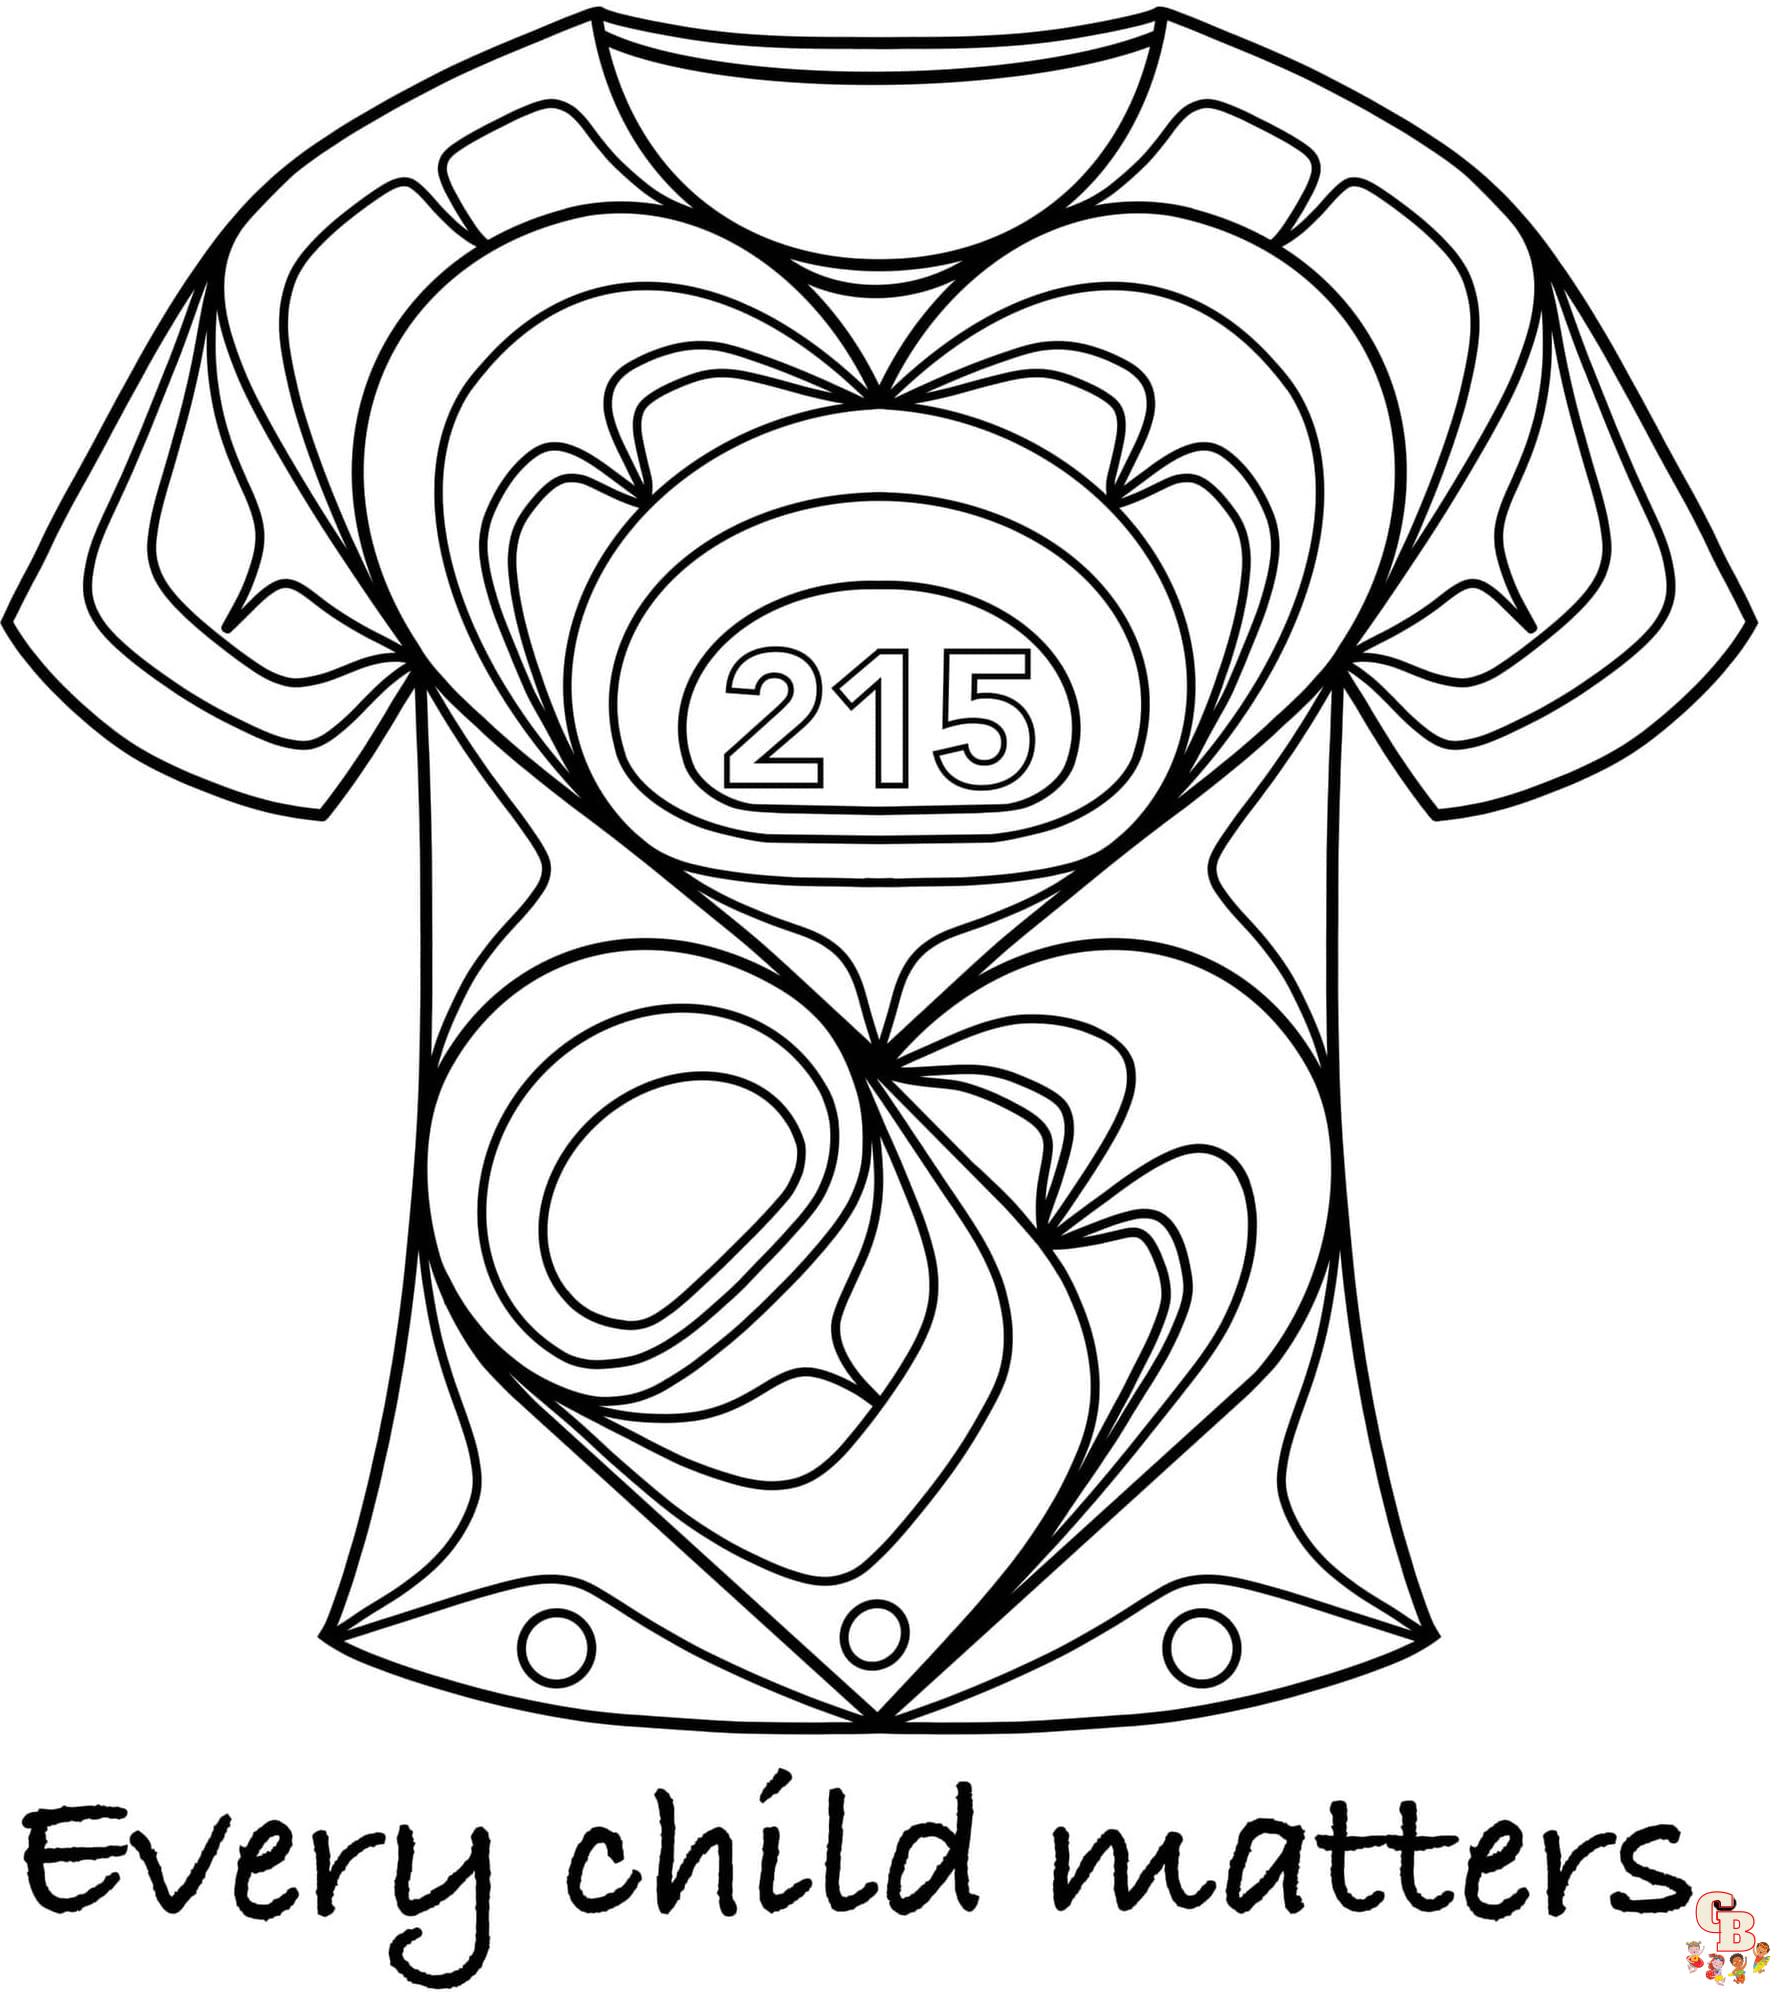 Every Child Matters coloring pages to print